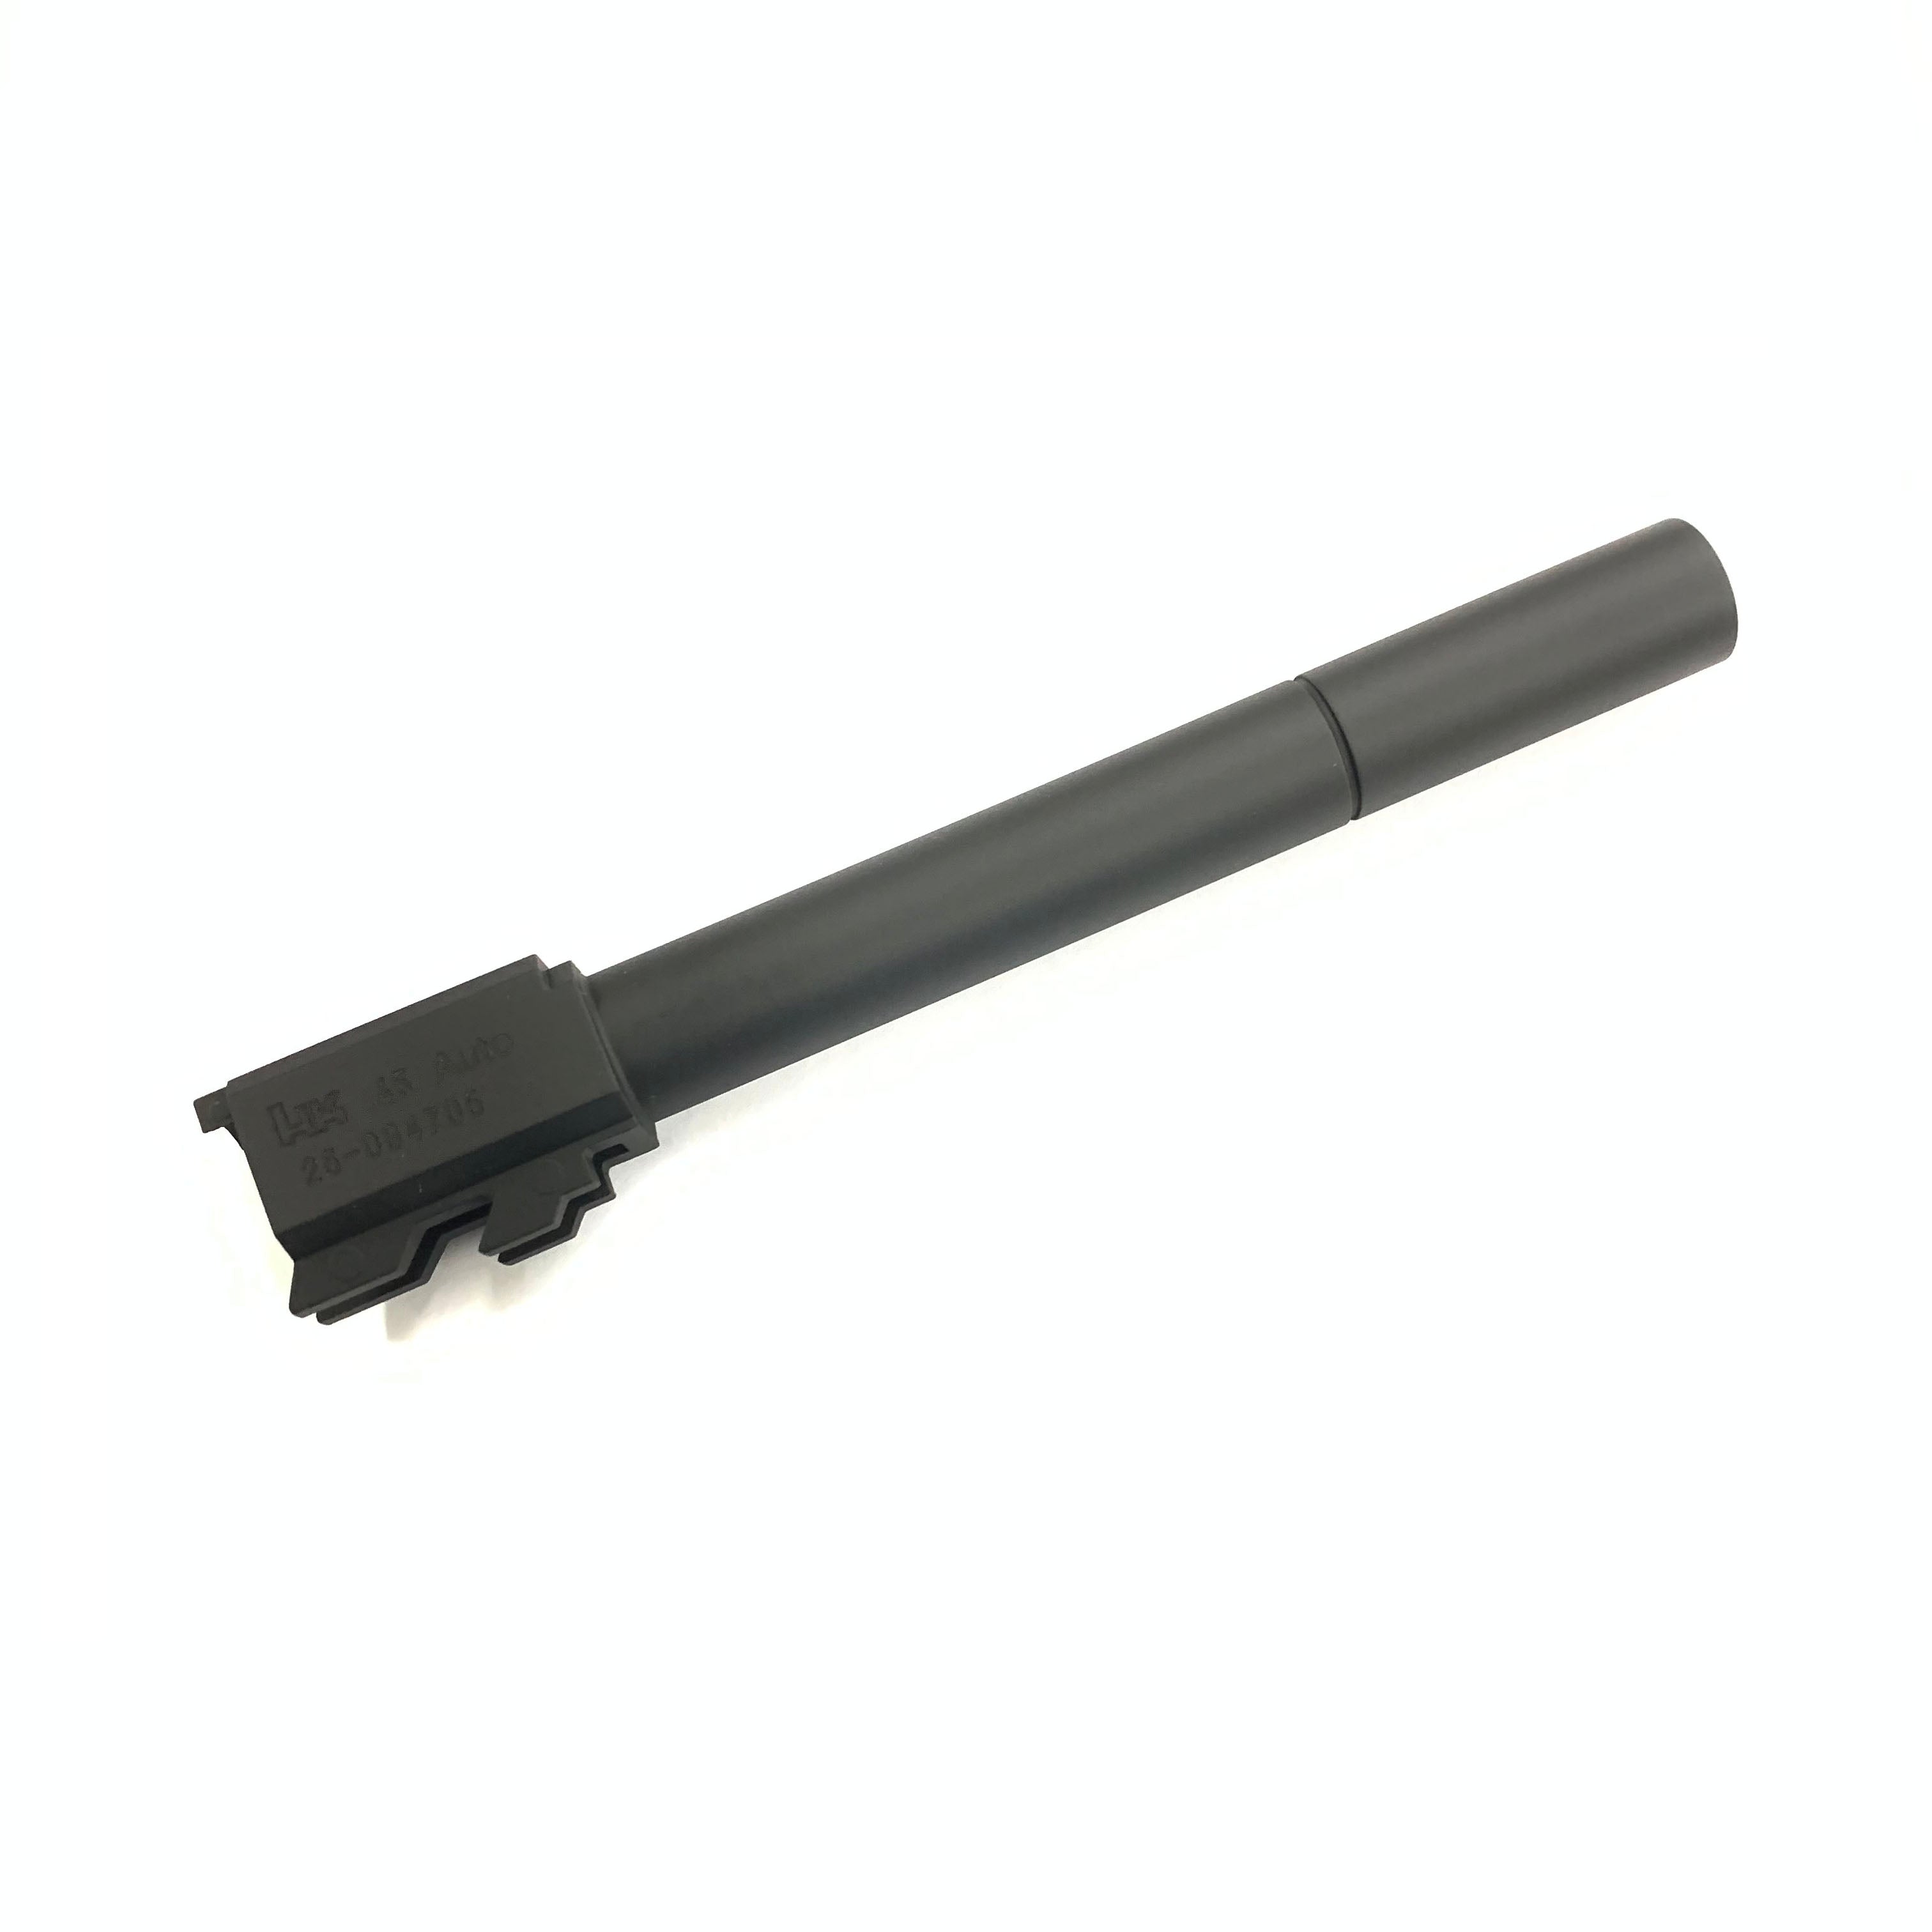 Outer Barrel - Metal (Part No.225HK) For KWA USP Match GBB